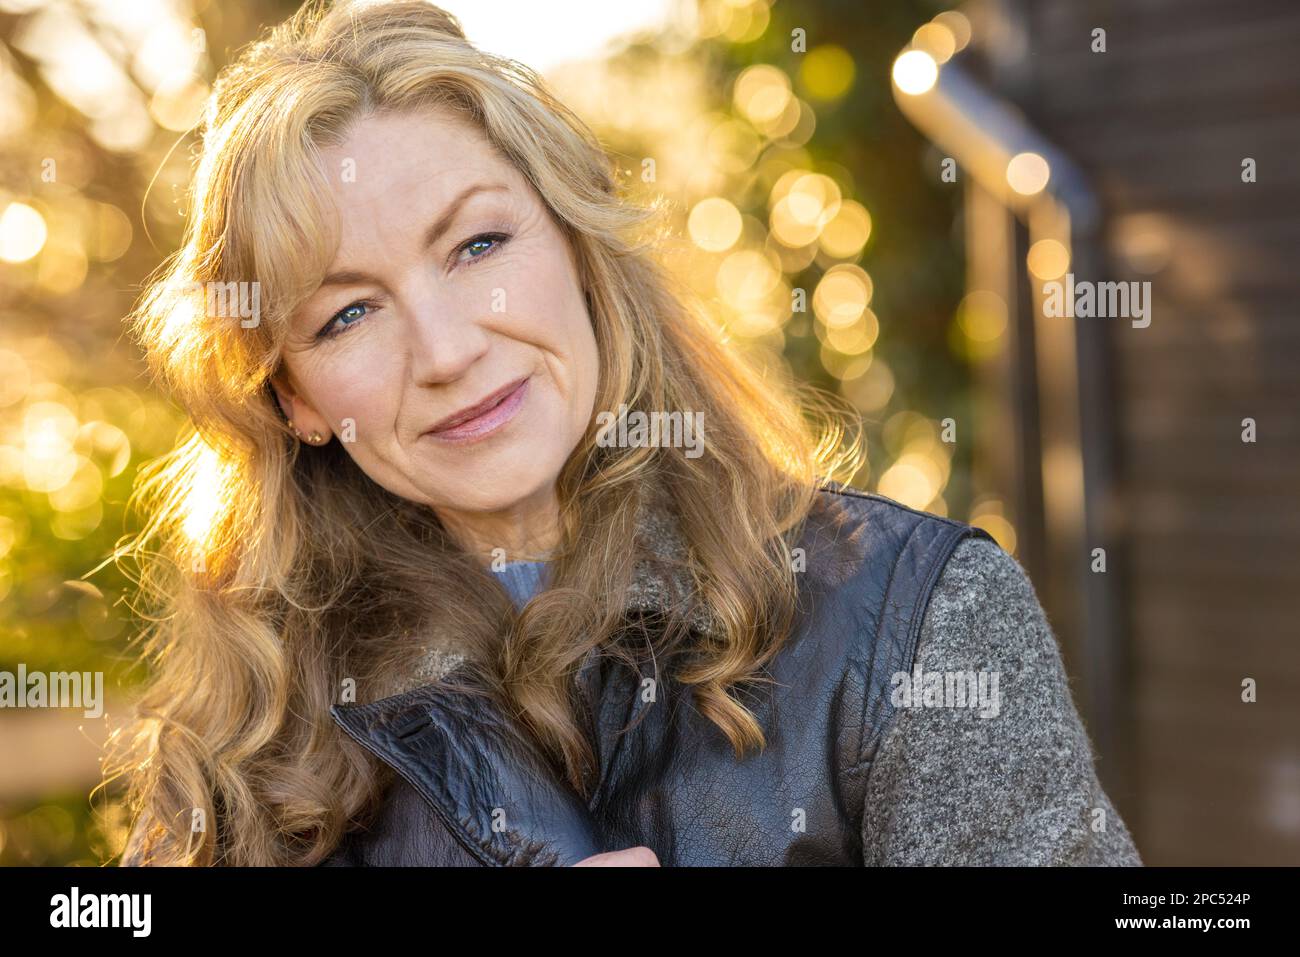 Attractive thoughtful middle aged woman outside smiling in golden hour sunlight Stock Photo